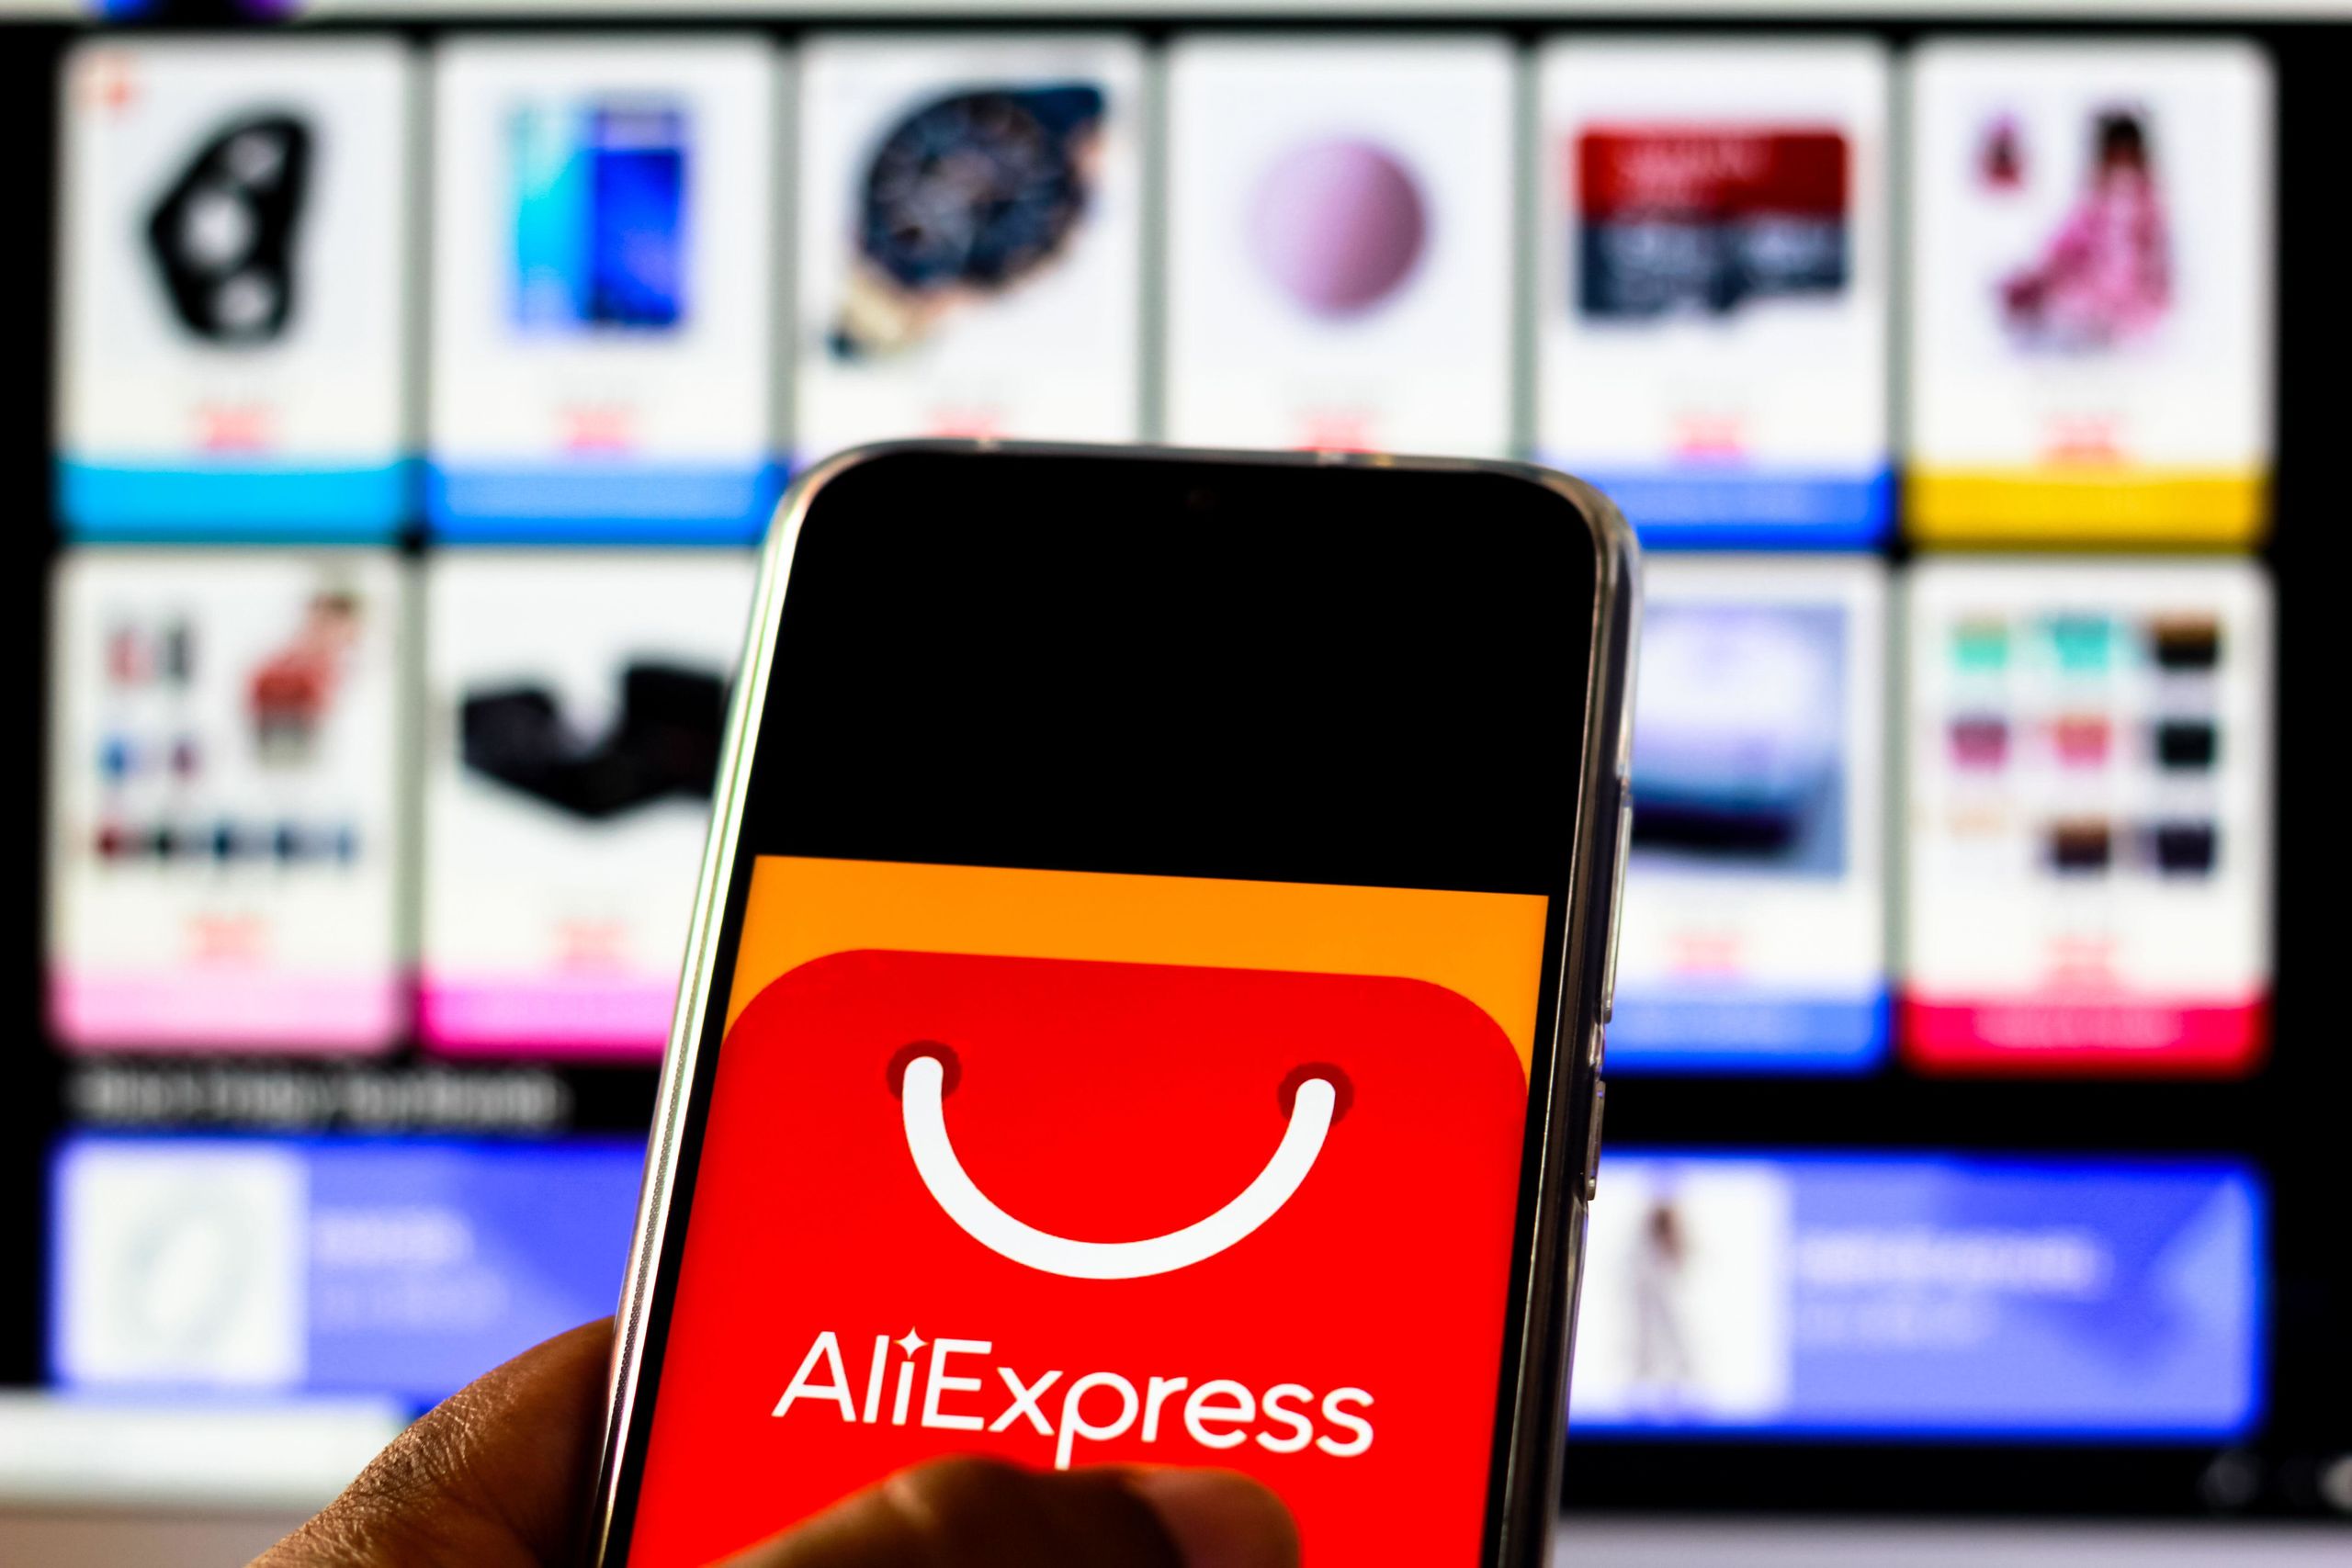 Aliexpress Founded